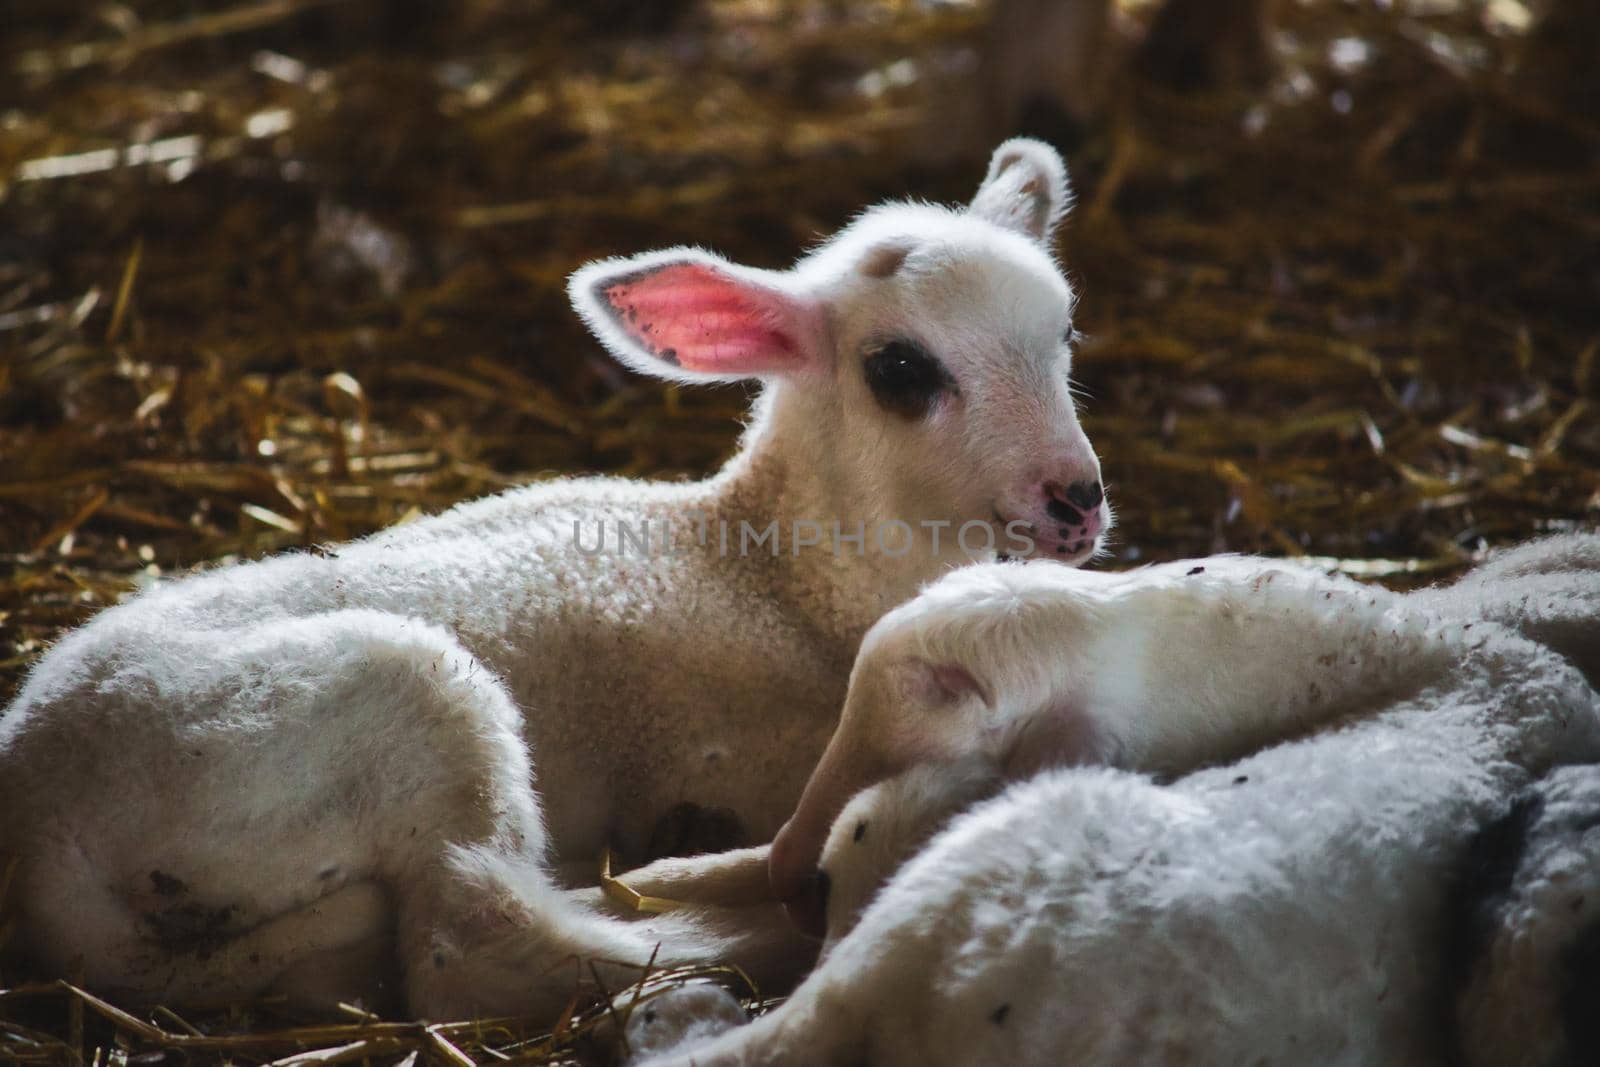 Cute white fluffy baby goat lying down on straw indoors